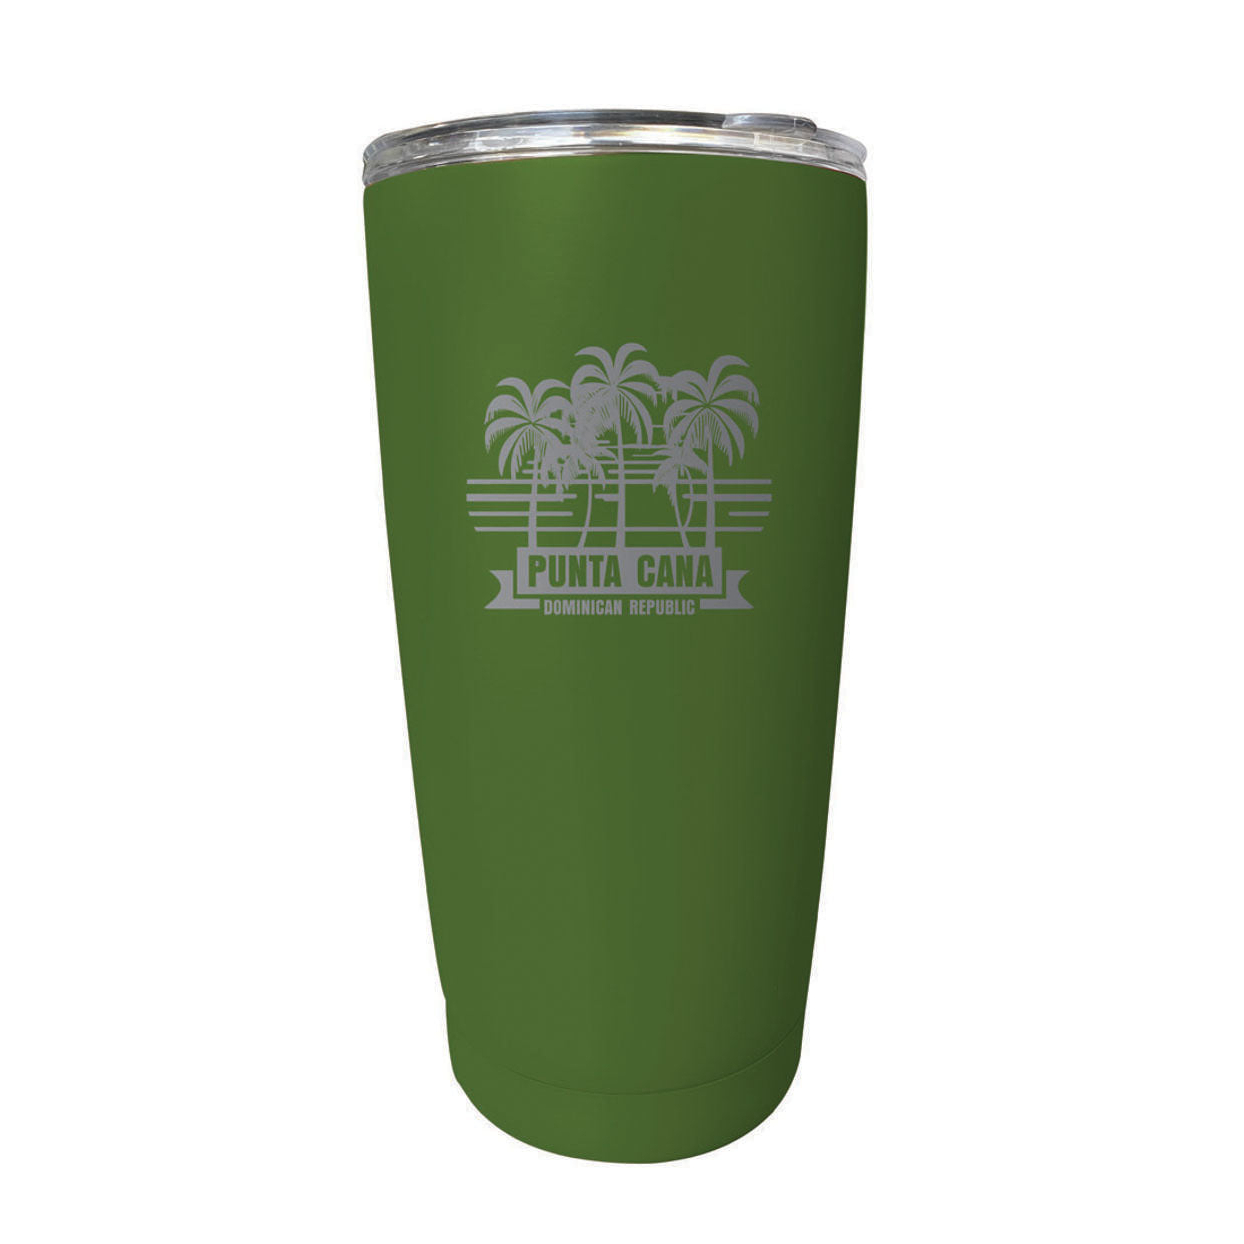 Punta Cana Dominican Republic Souvenir 16 Oz Stainless Steel Insulated Tumbler Etched - Green, PALM BEACH